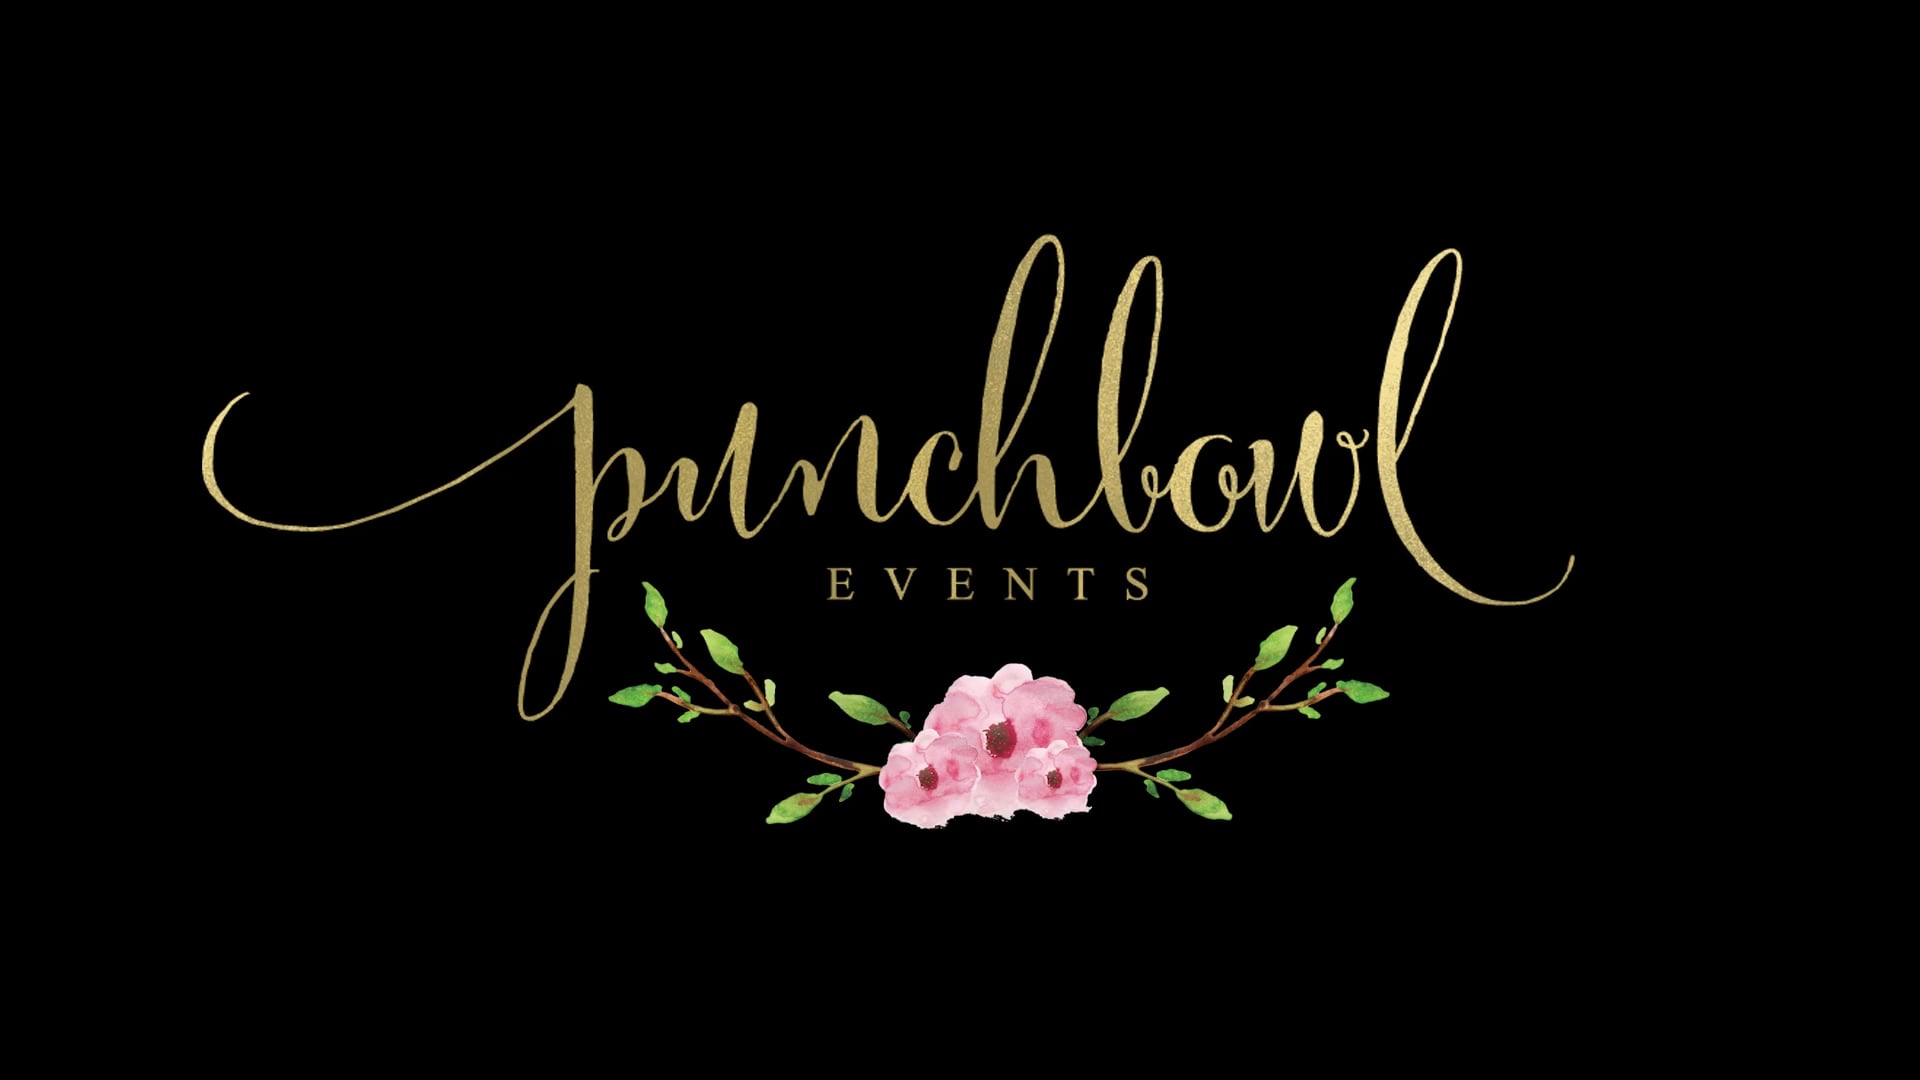 Punchbowl Events